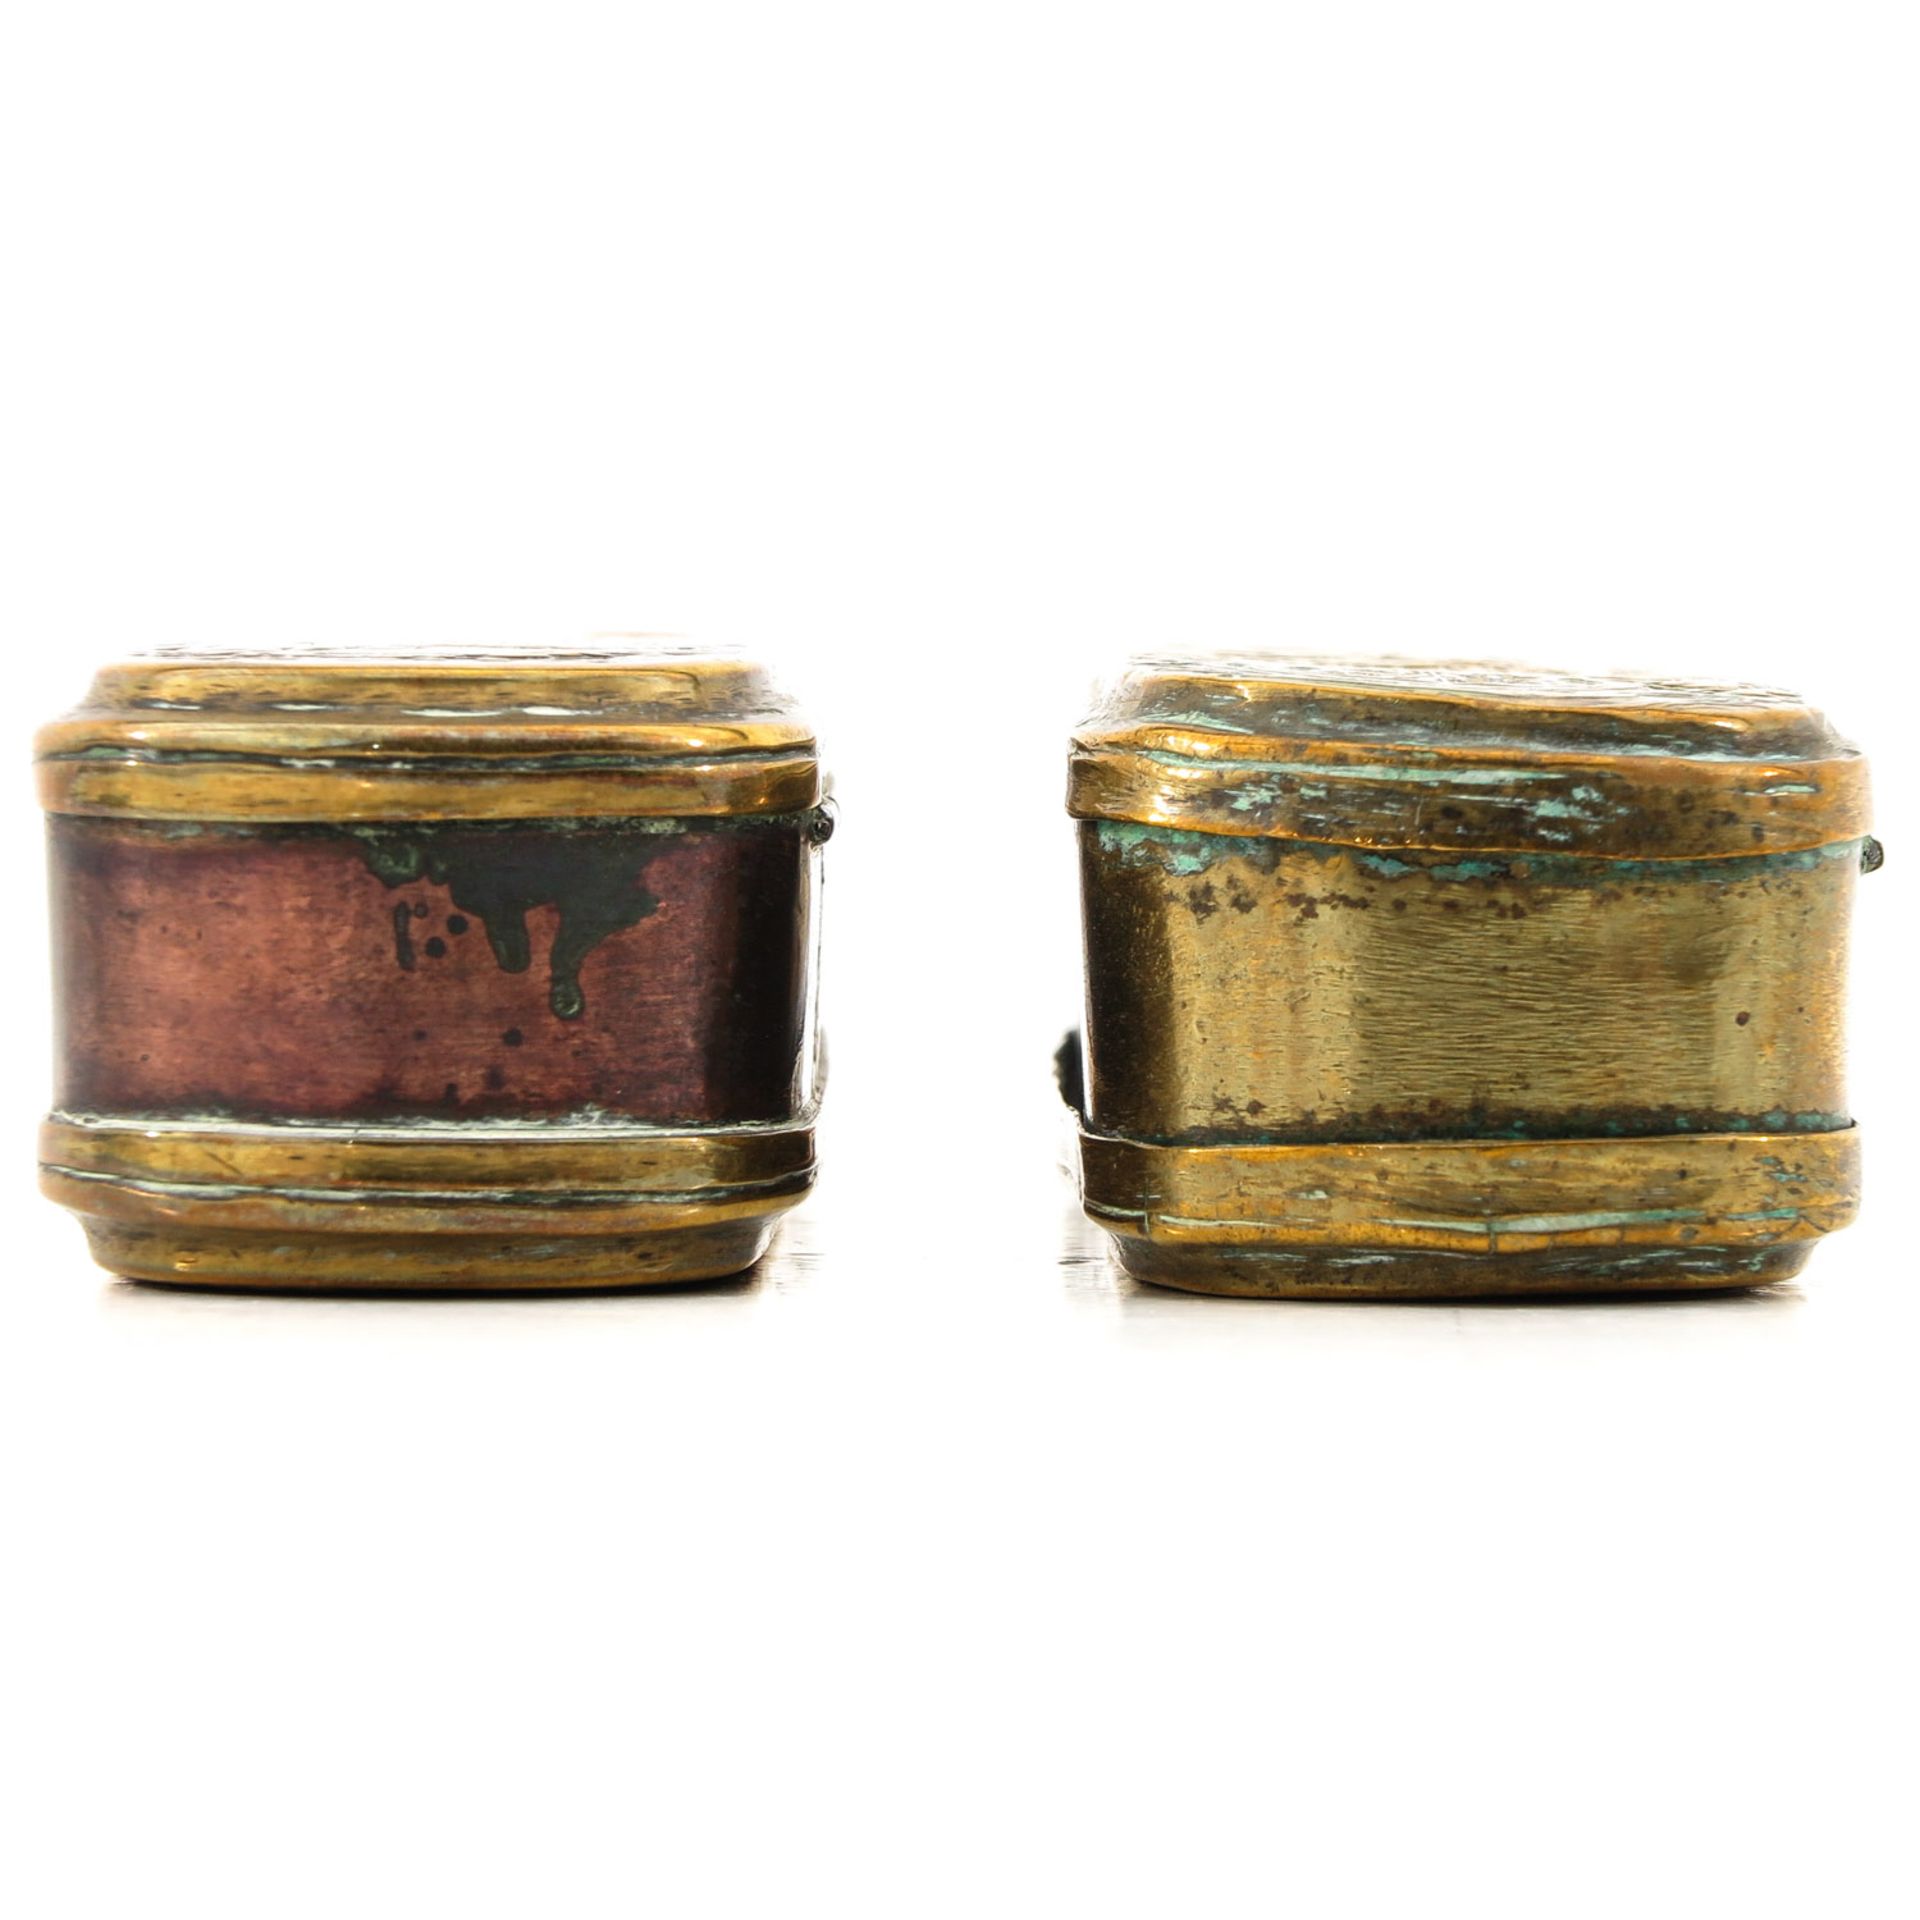 A Collection of 2 18th Century Copper Tobacco Boxes - Image 2 of 9